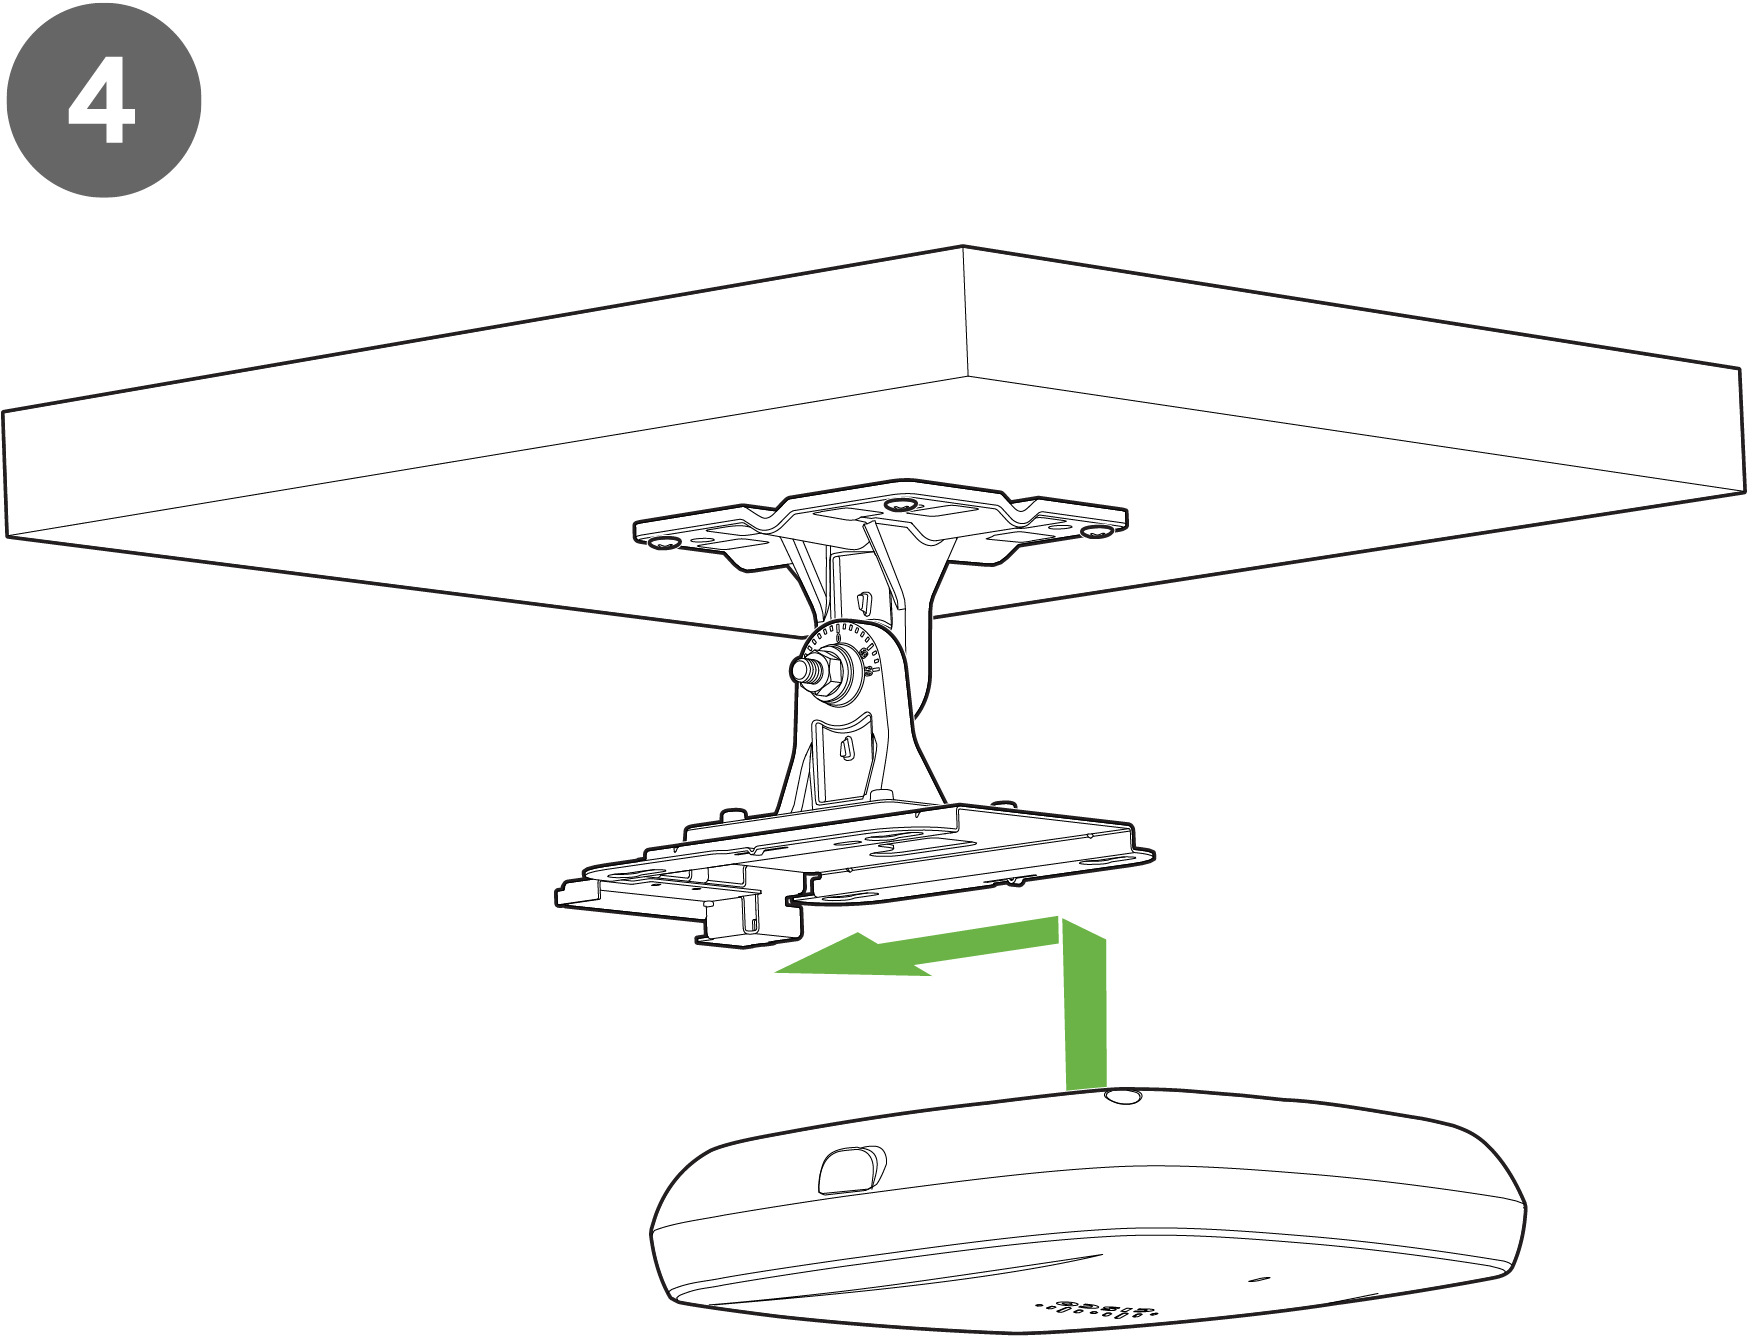 Image showing attachment of the AP to the AIR-AP-BRACKET-2 with an arrow suggesting direction 